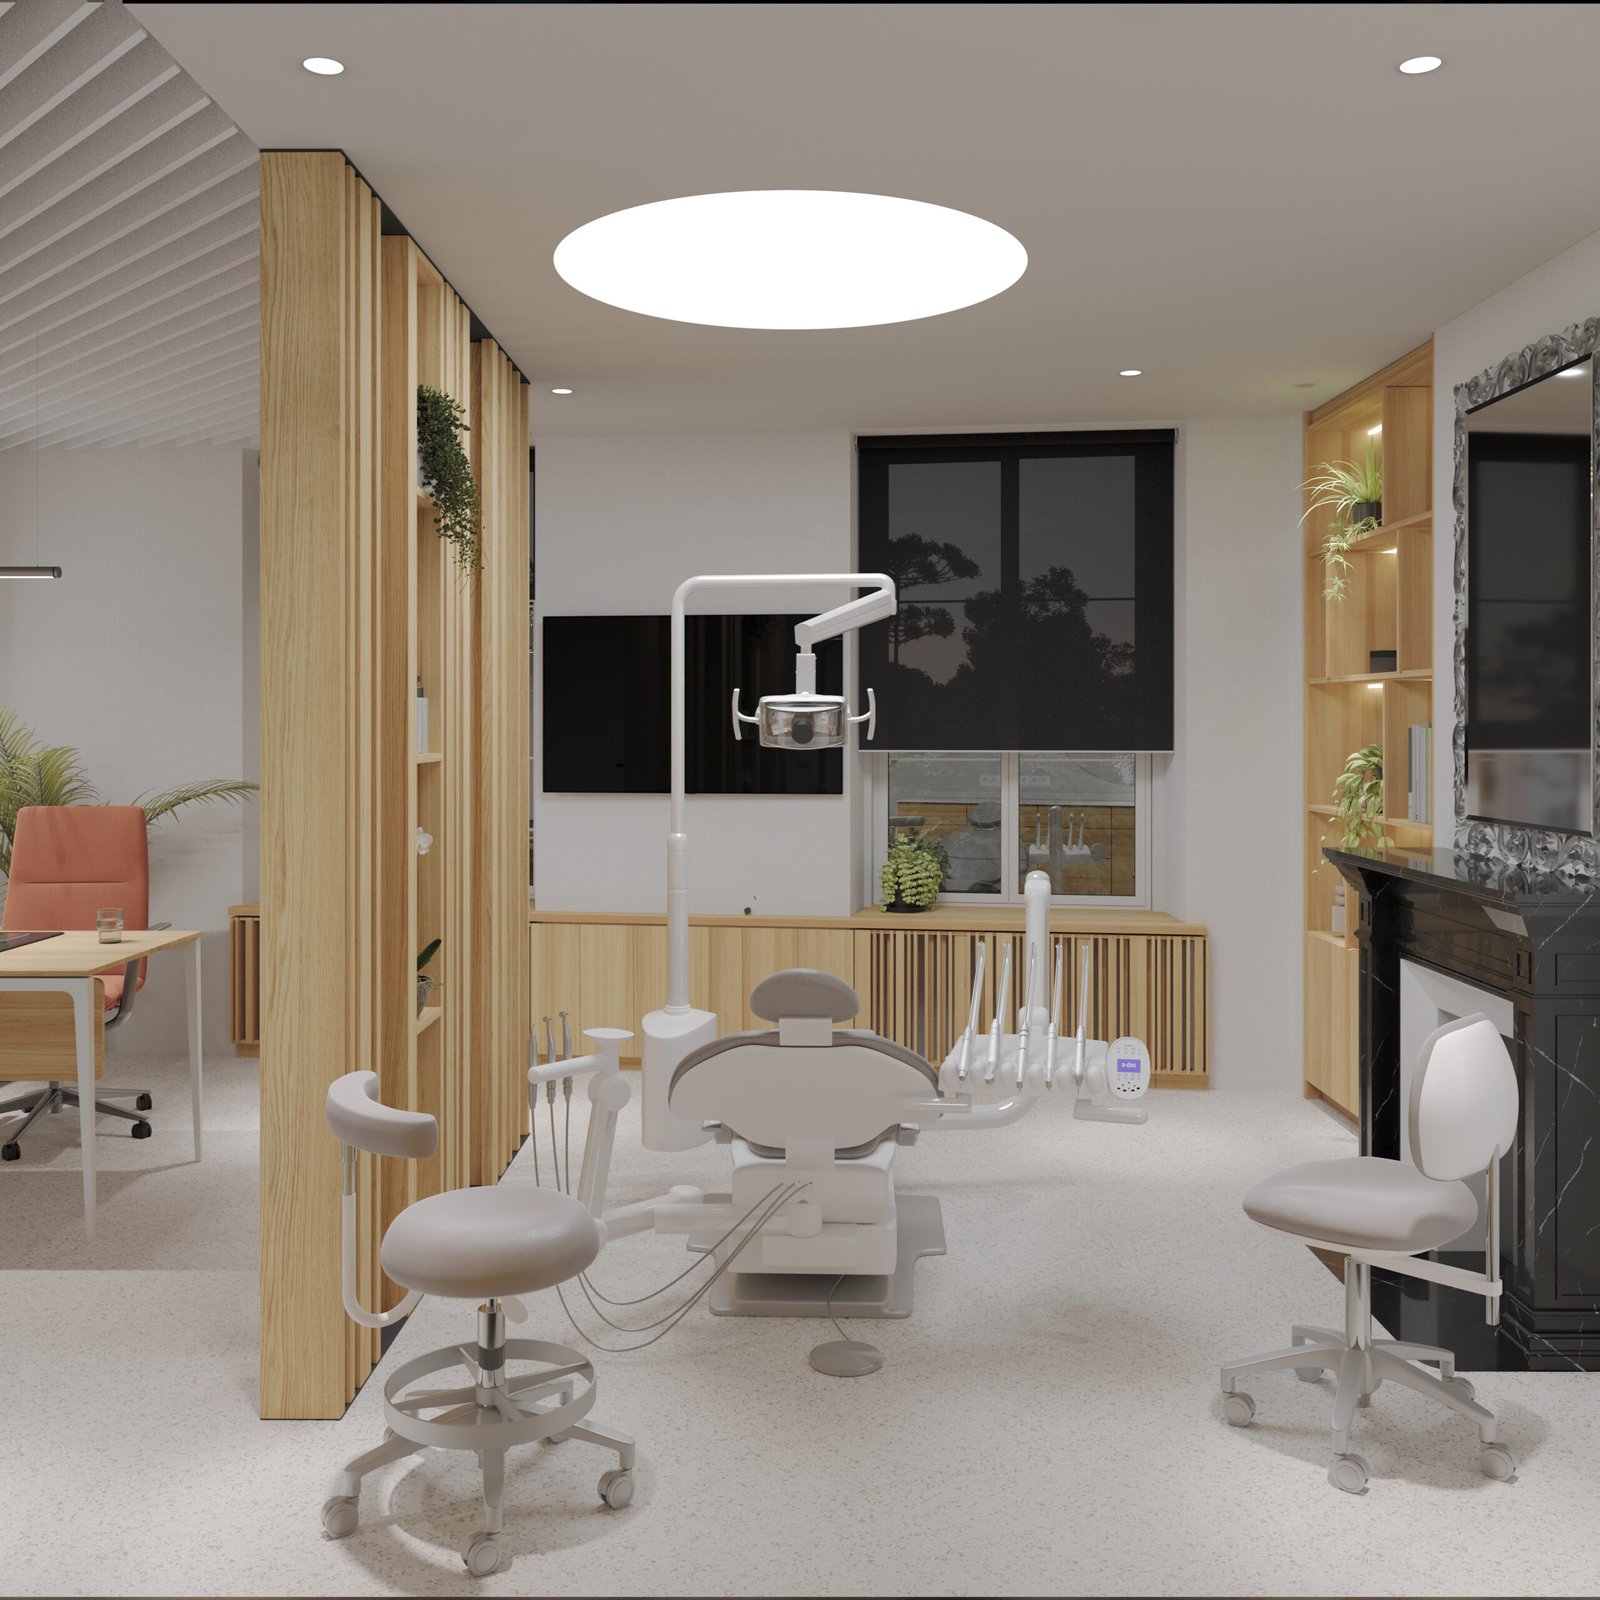 State-of-the-art dental chair with wooden paneling and ambient lighting in clinic.